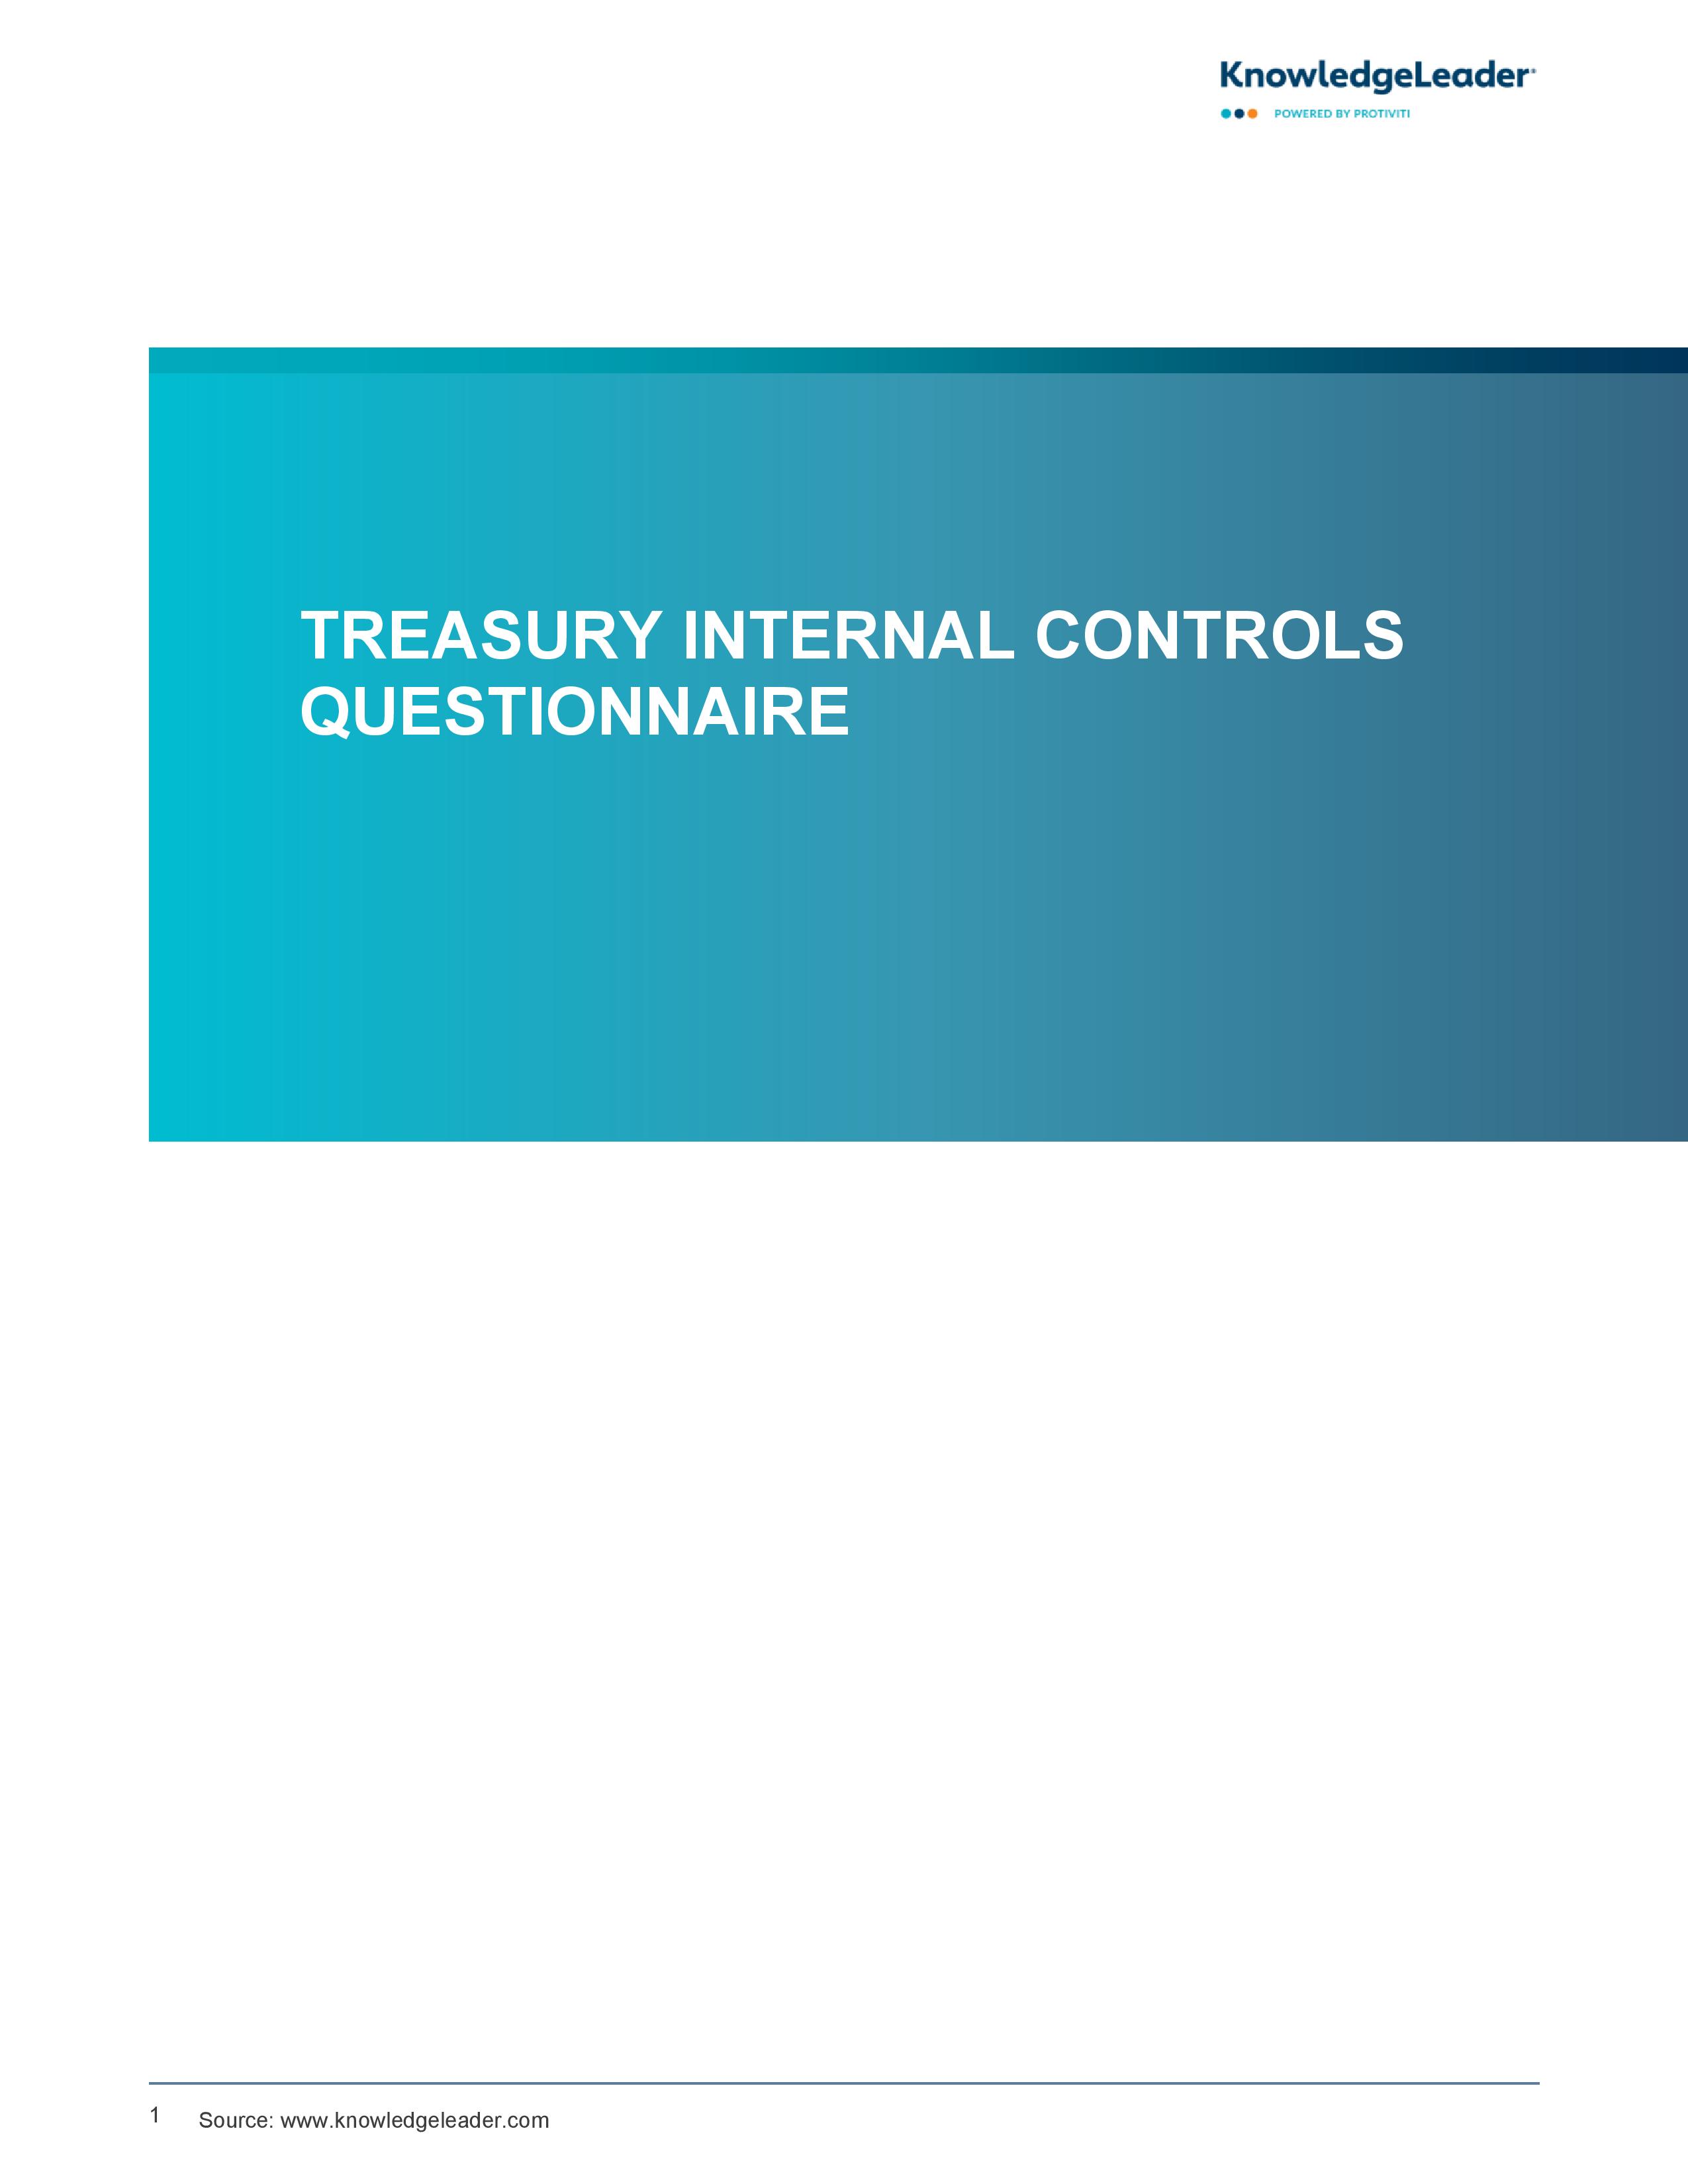 screenshot of the first page of the Treasury Internal Controls Questionnaire